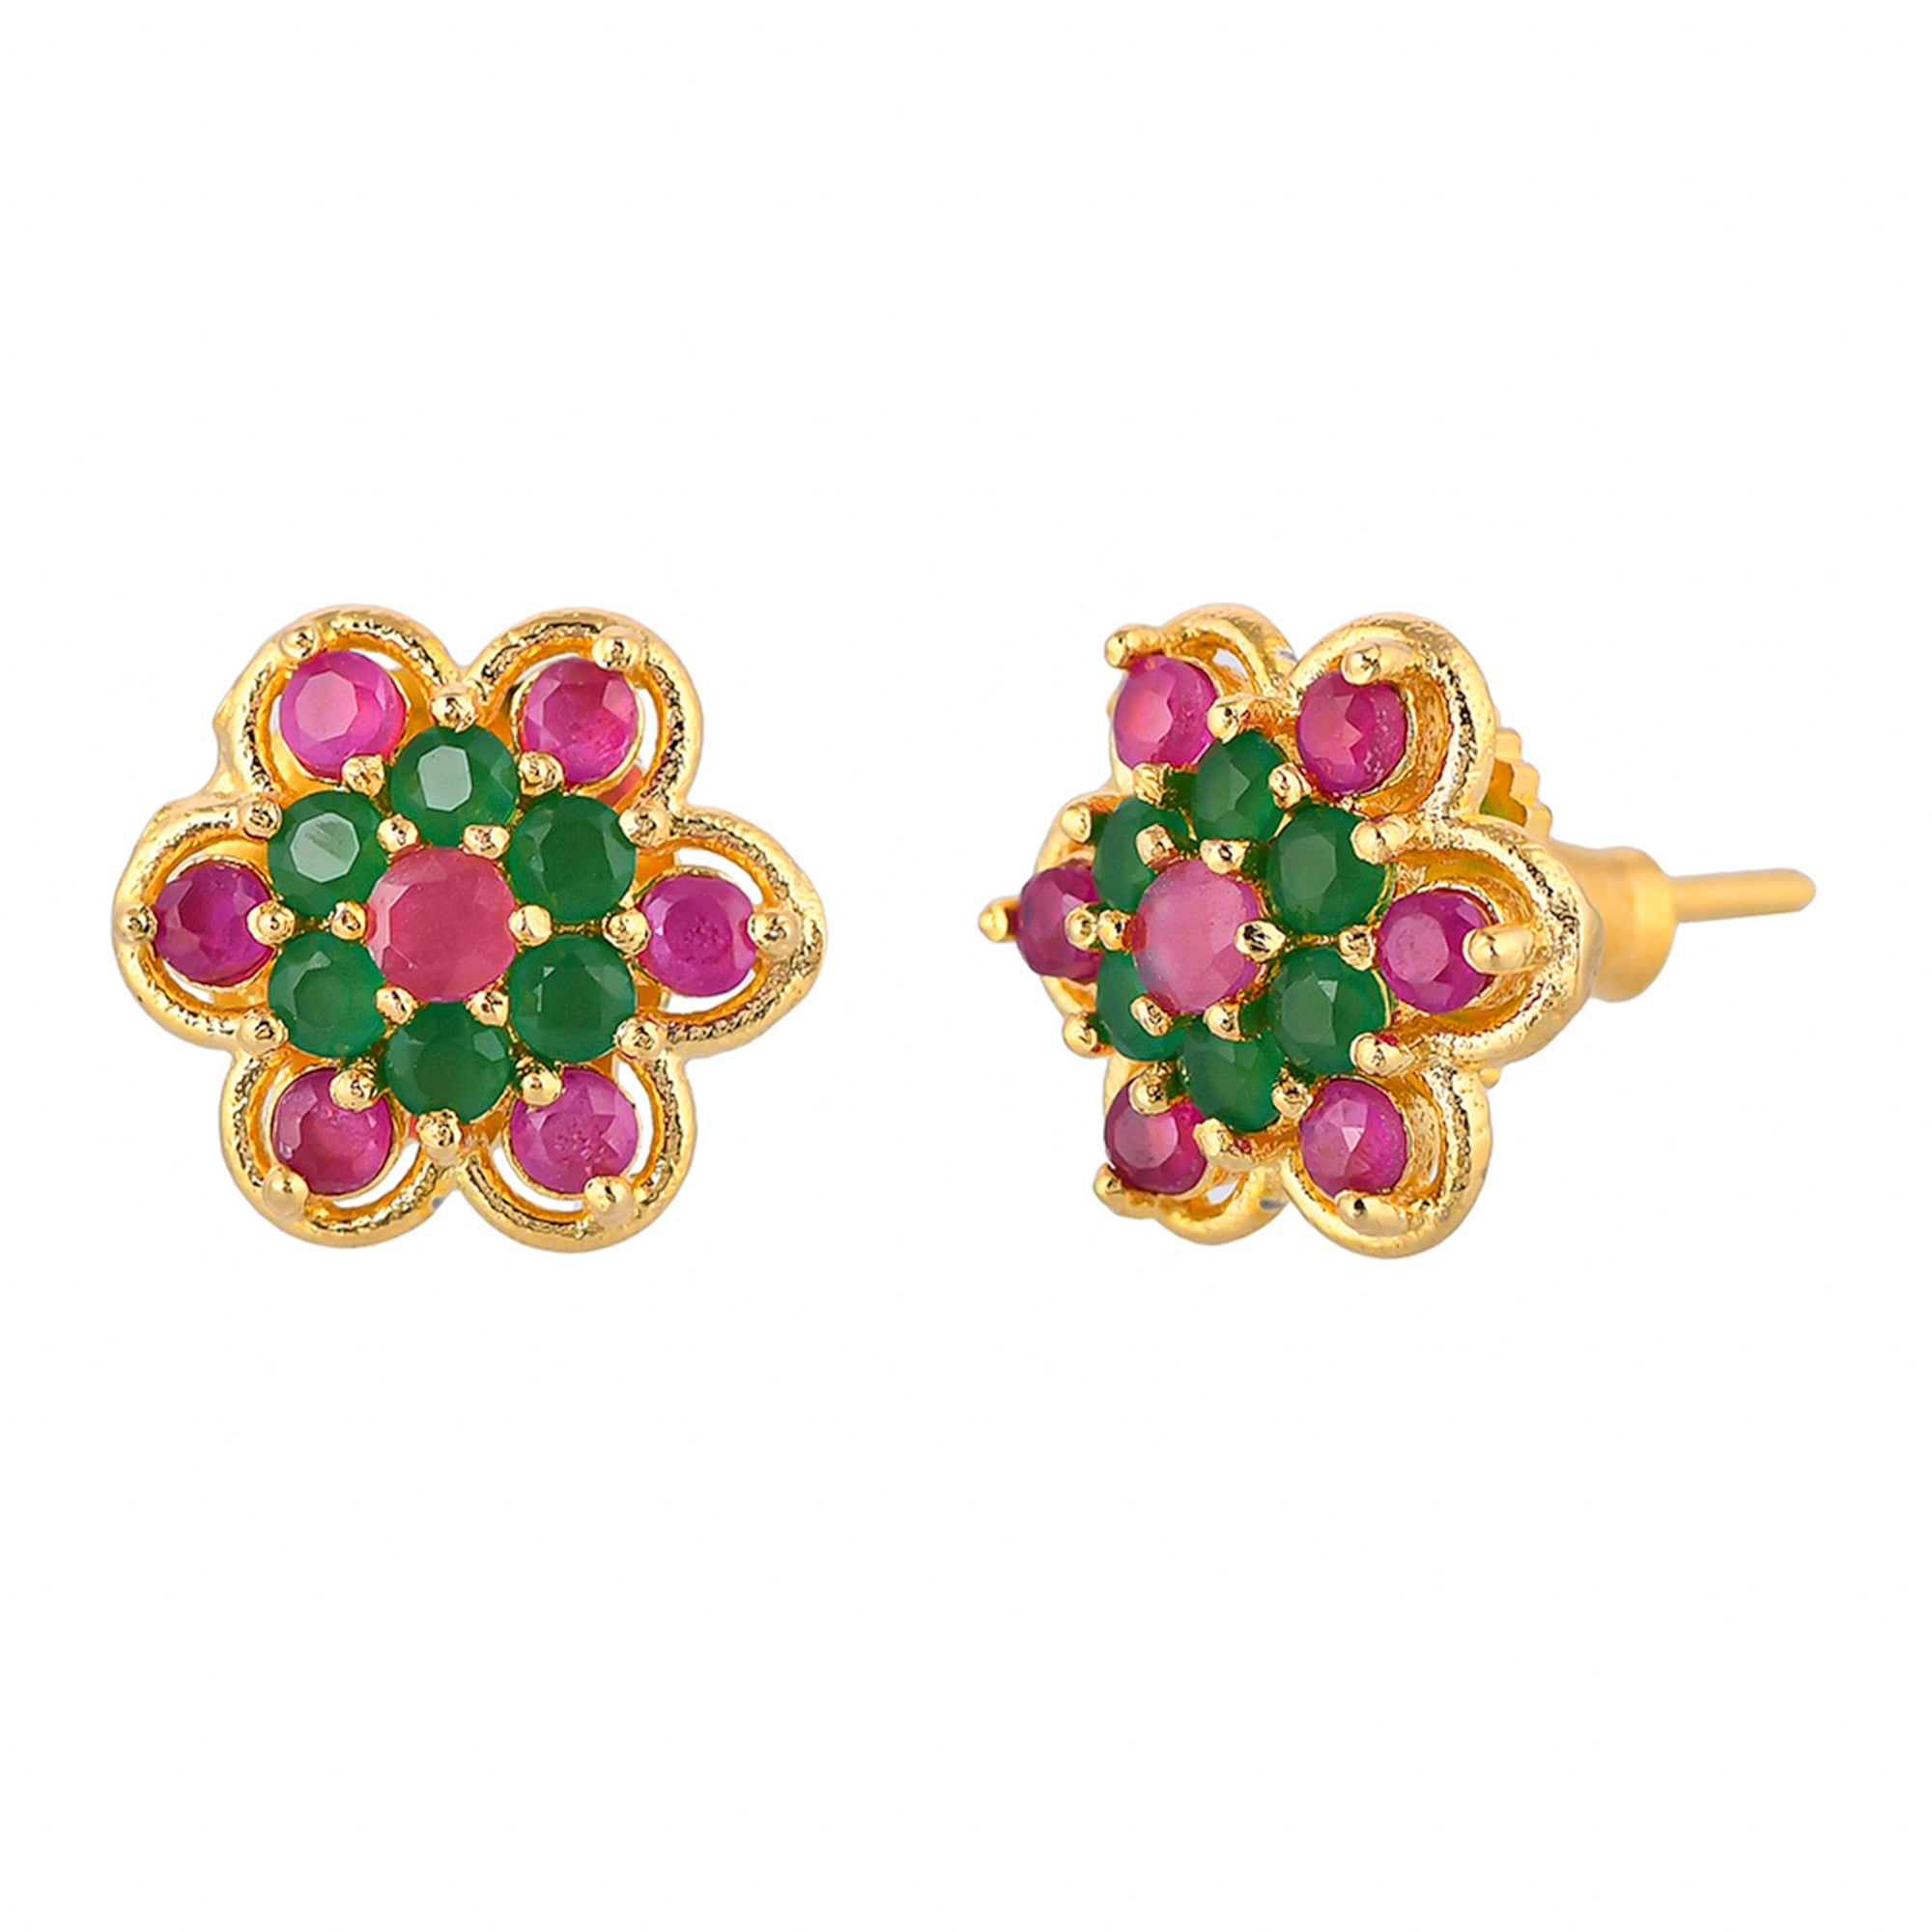 Women's Floral Pink And Green Cz Stud Earrings - Voylla